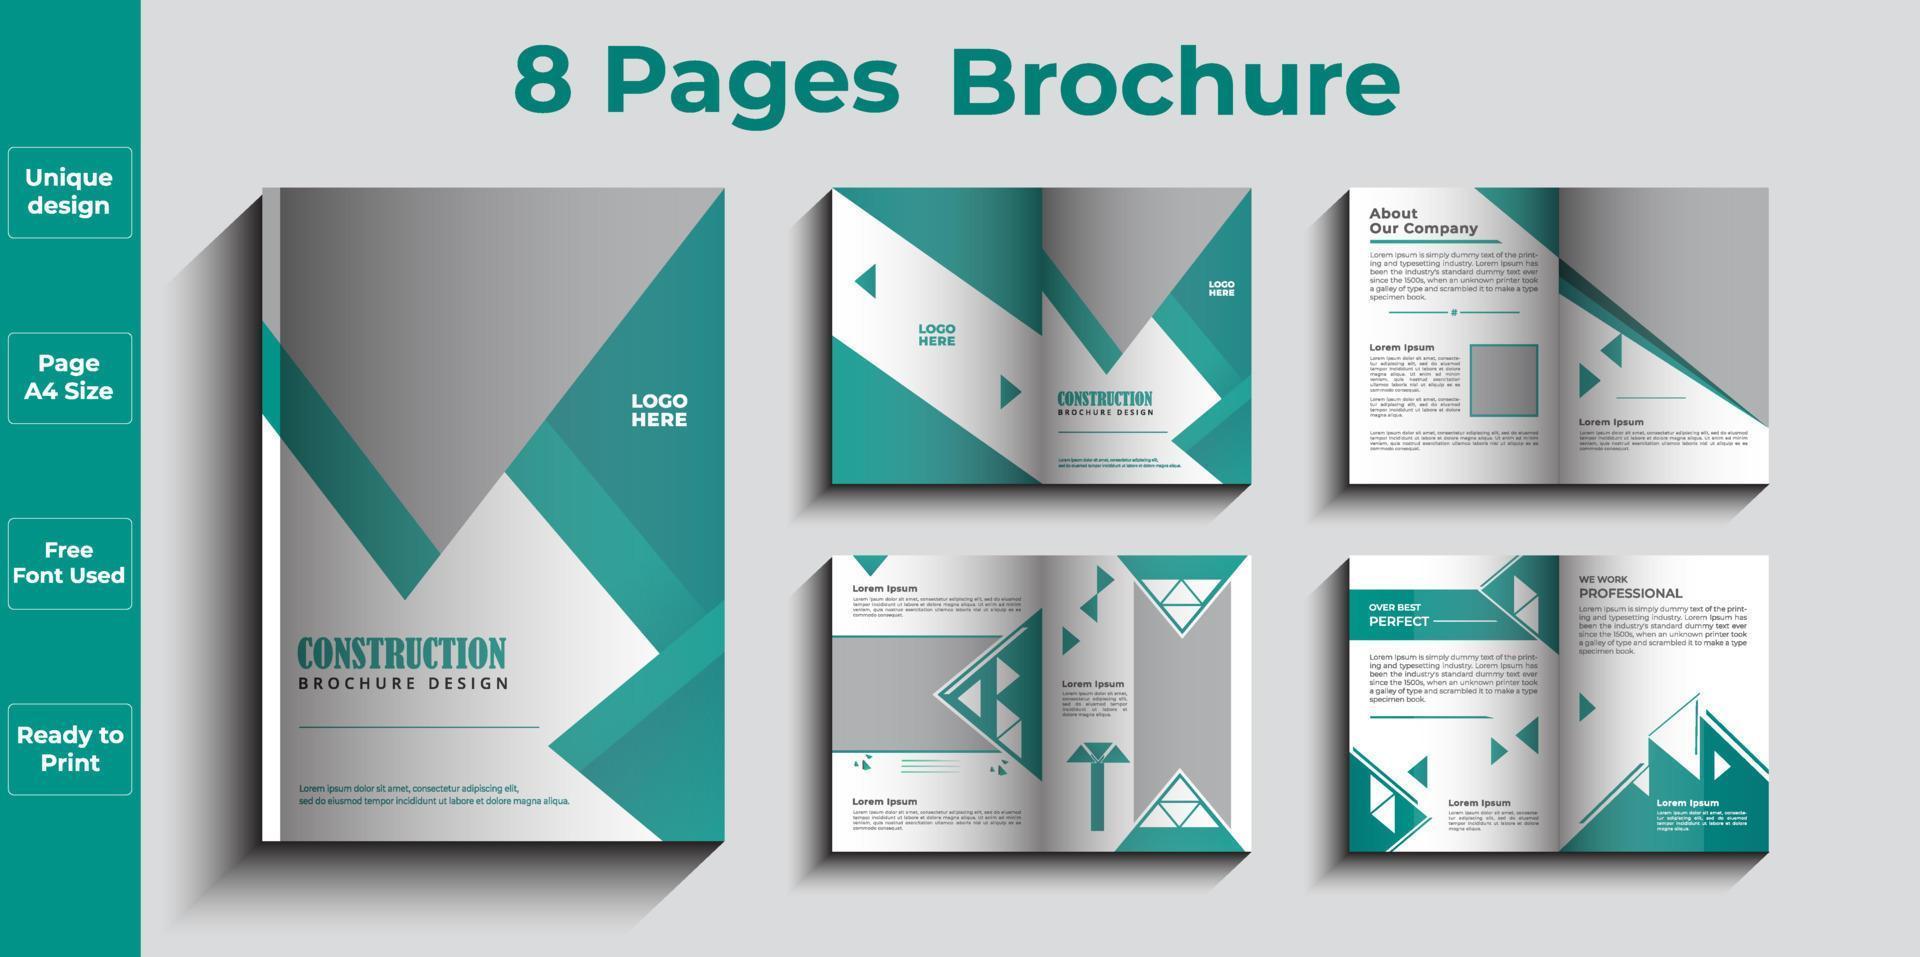 8 Pages Business Brochure Design Template vector